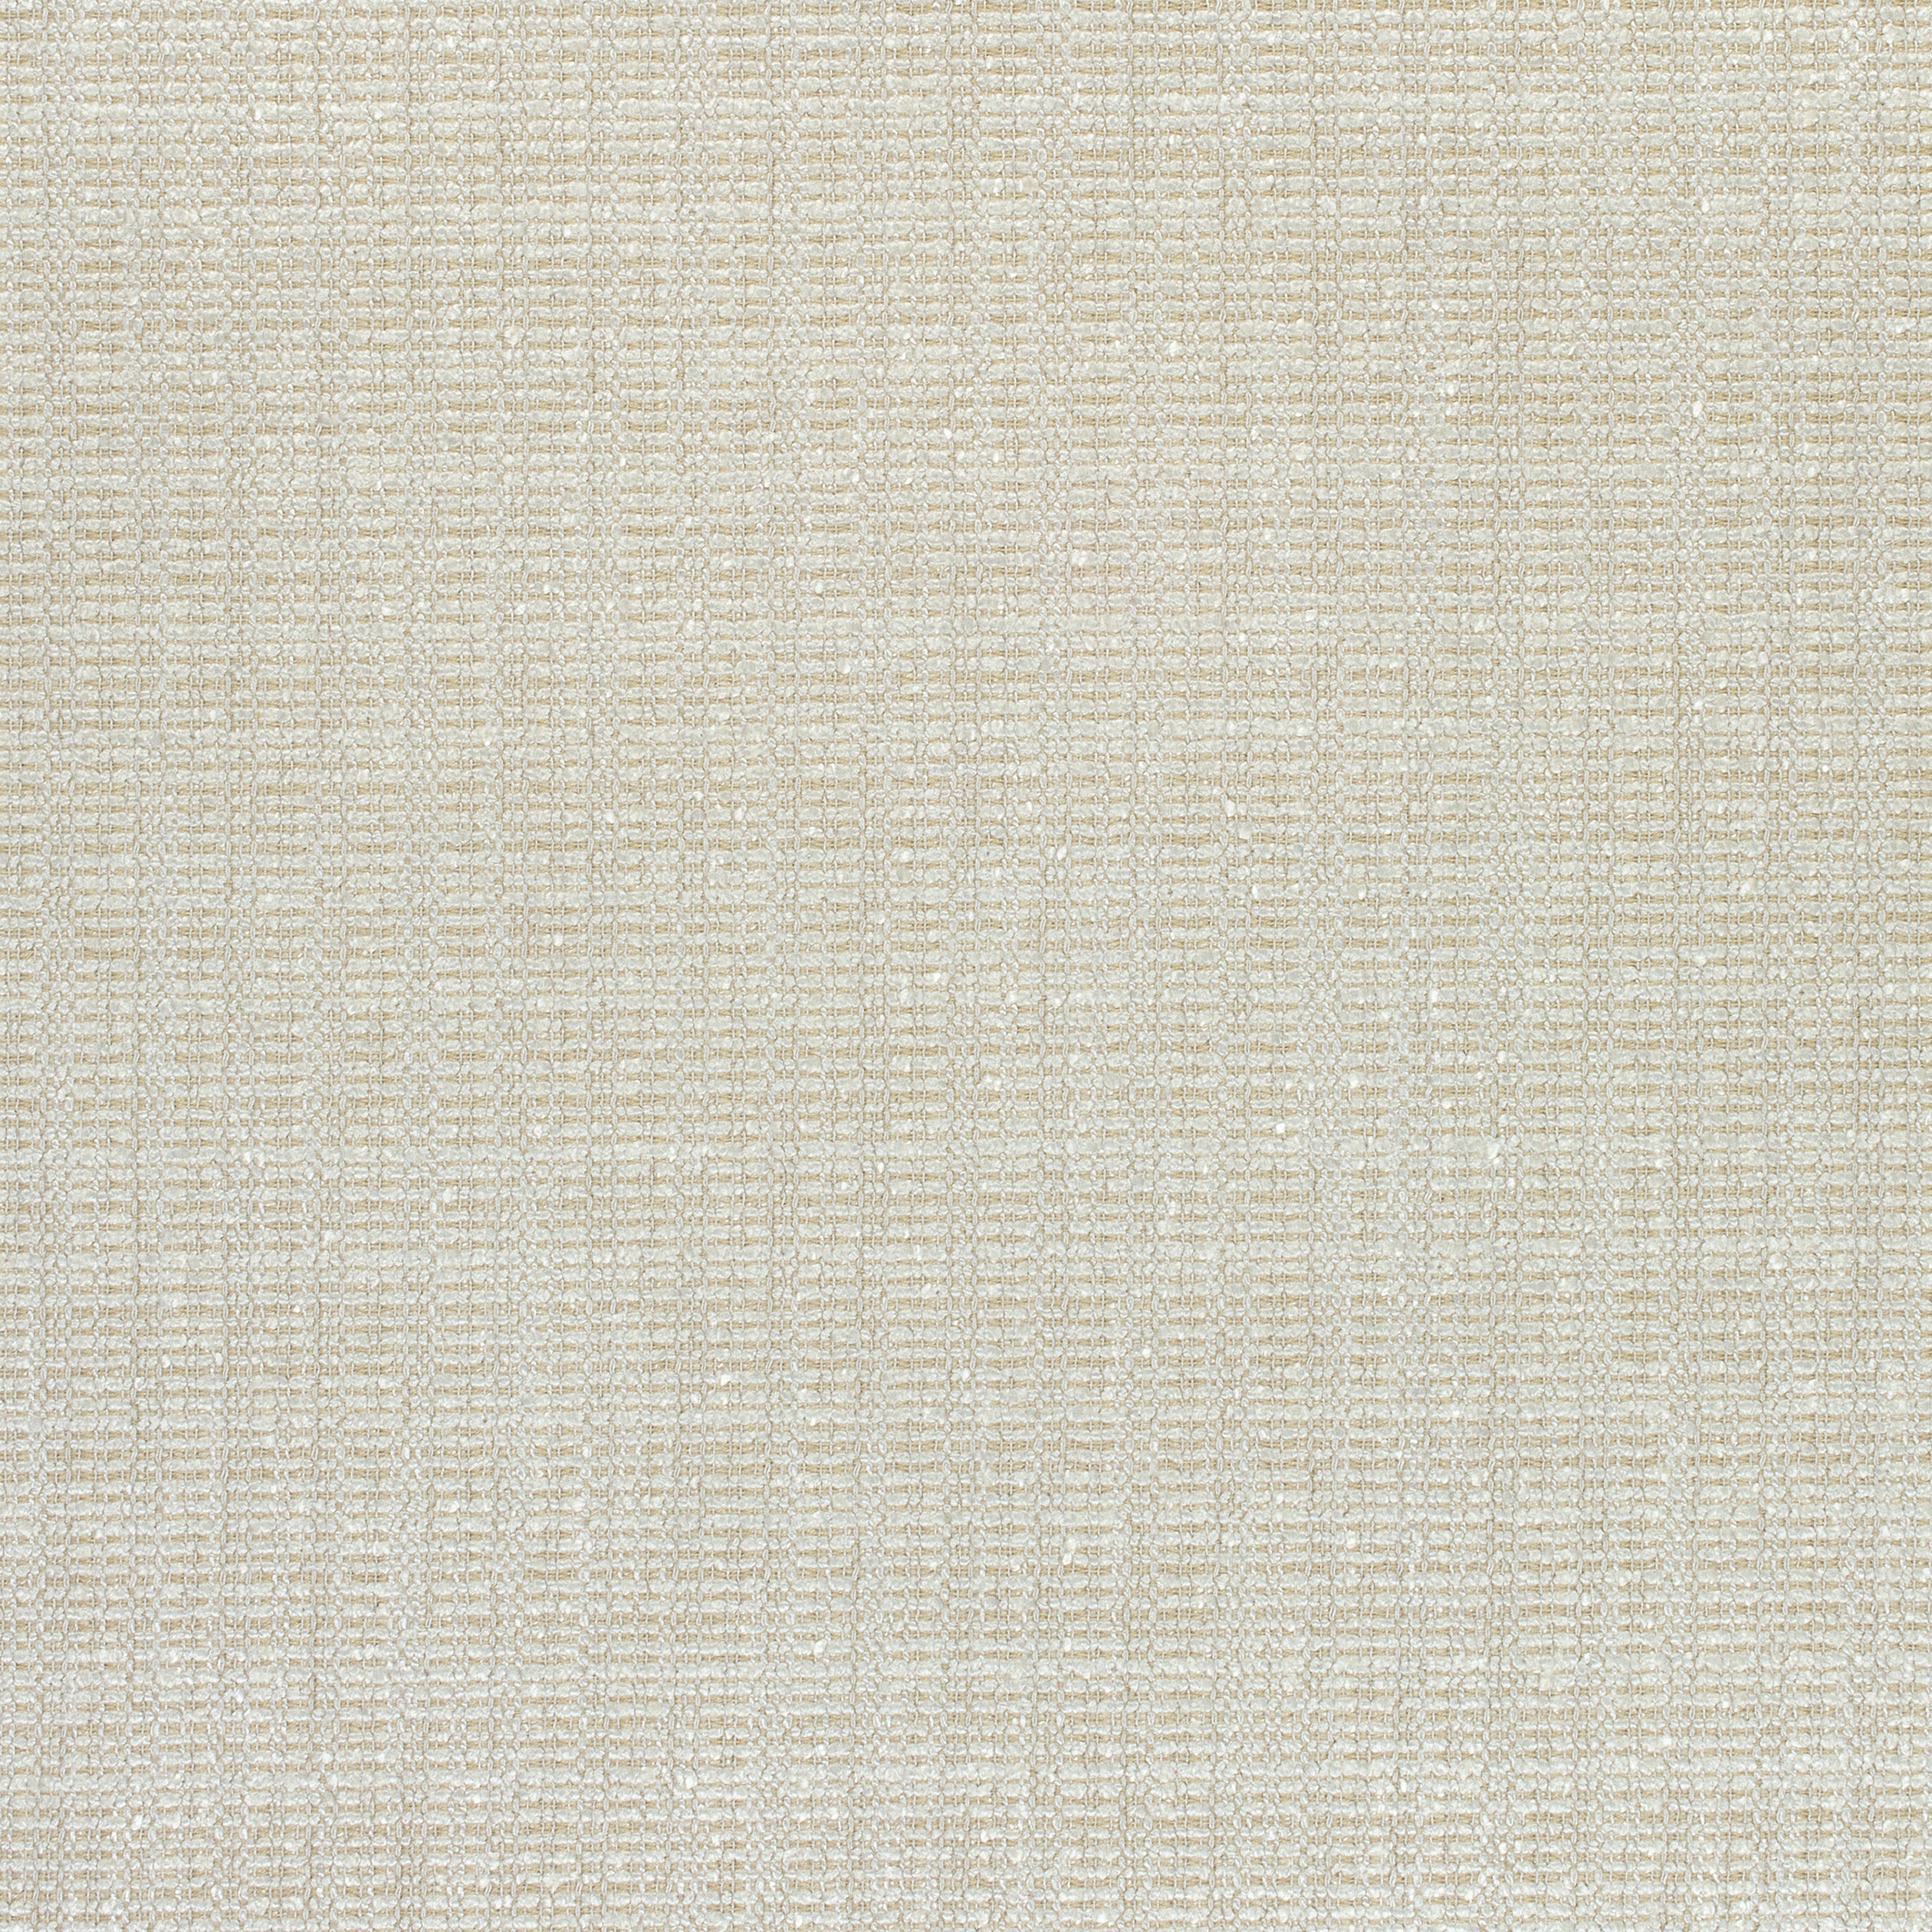 Avery fabric in linen color - pattern number W789132 - by Thibaut in the Reverie collection